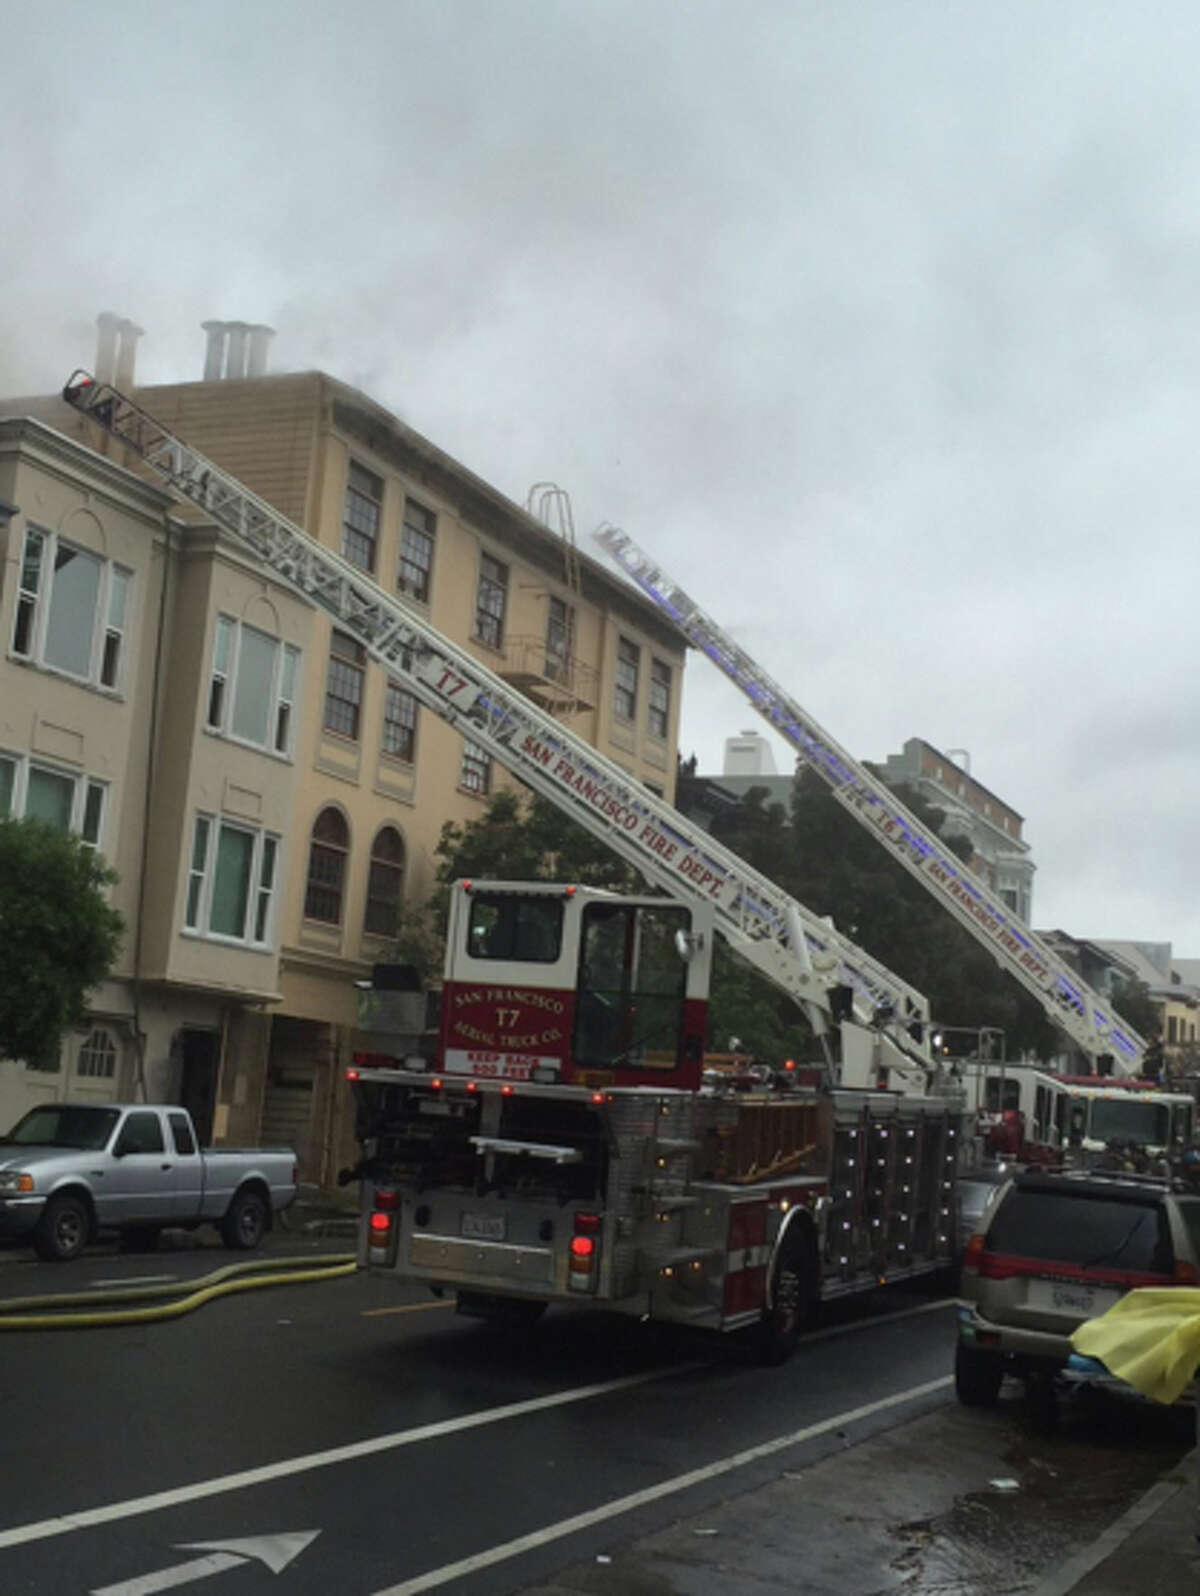 A two-alarm fire broke out in an four-story apartment building in San Francisco’s Mission District on Thursday, April 21, 2016.